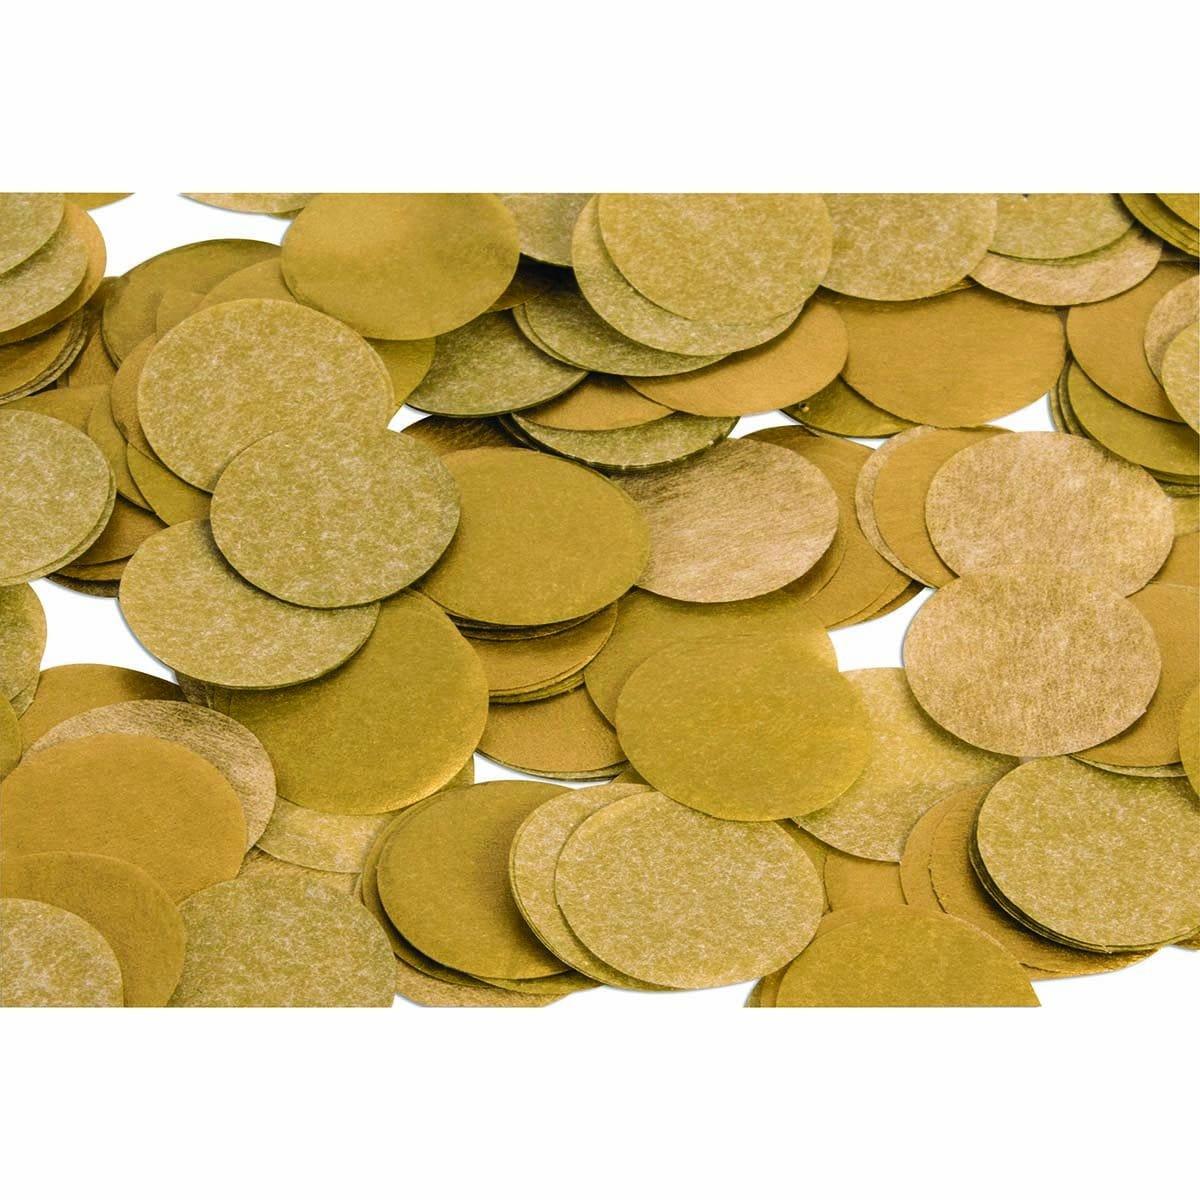 Buy Balloons Gold Paper Confetti, 0.8 Ounce sold at Party Expert